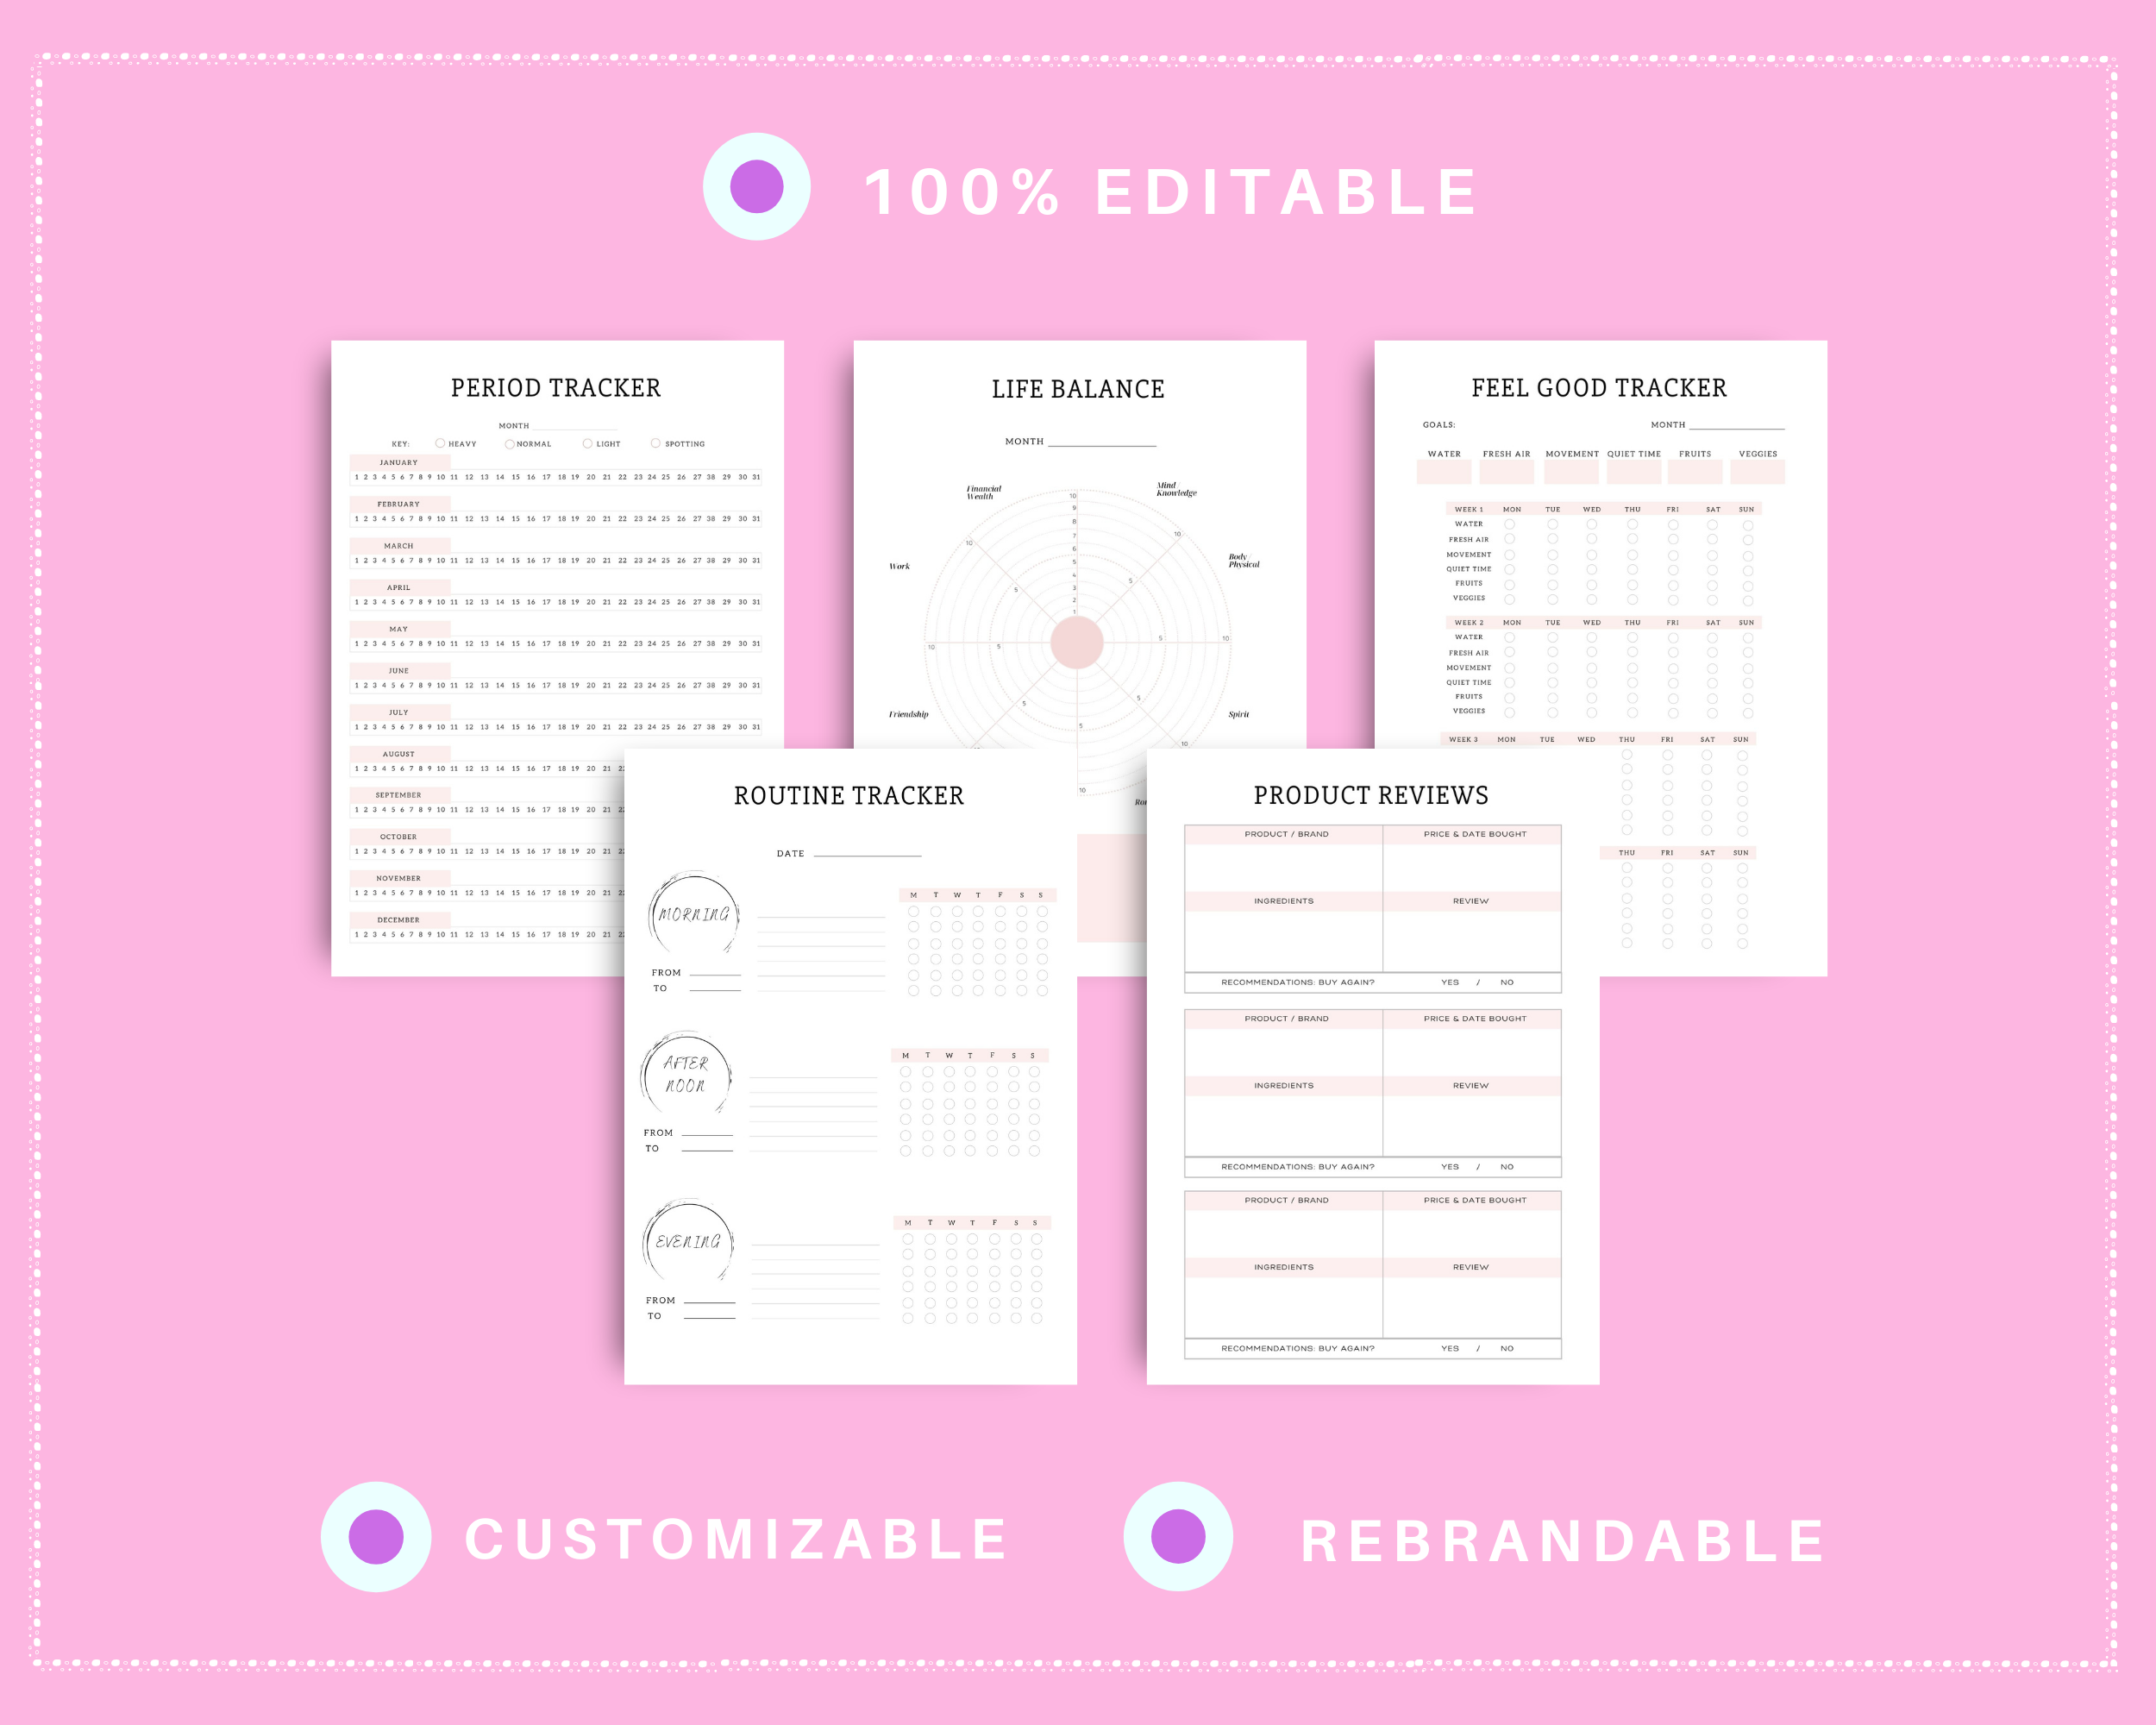 Editable Self Care Planner in Canva | Commercial Use